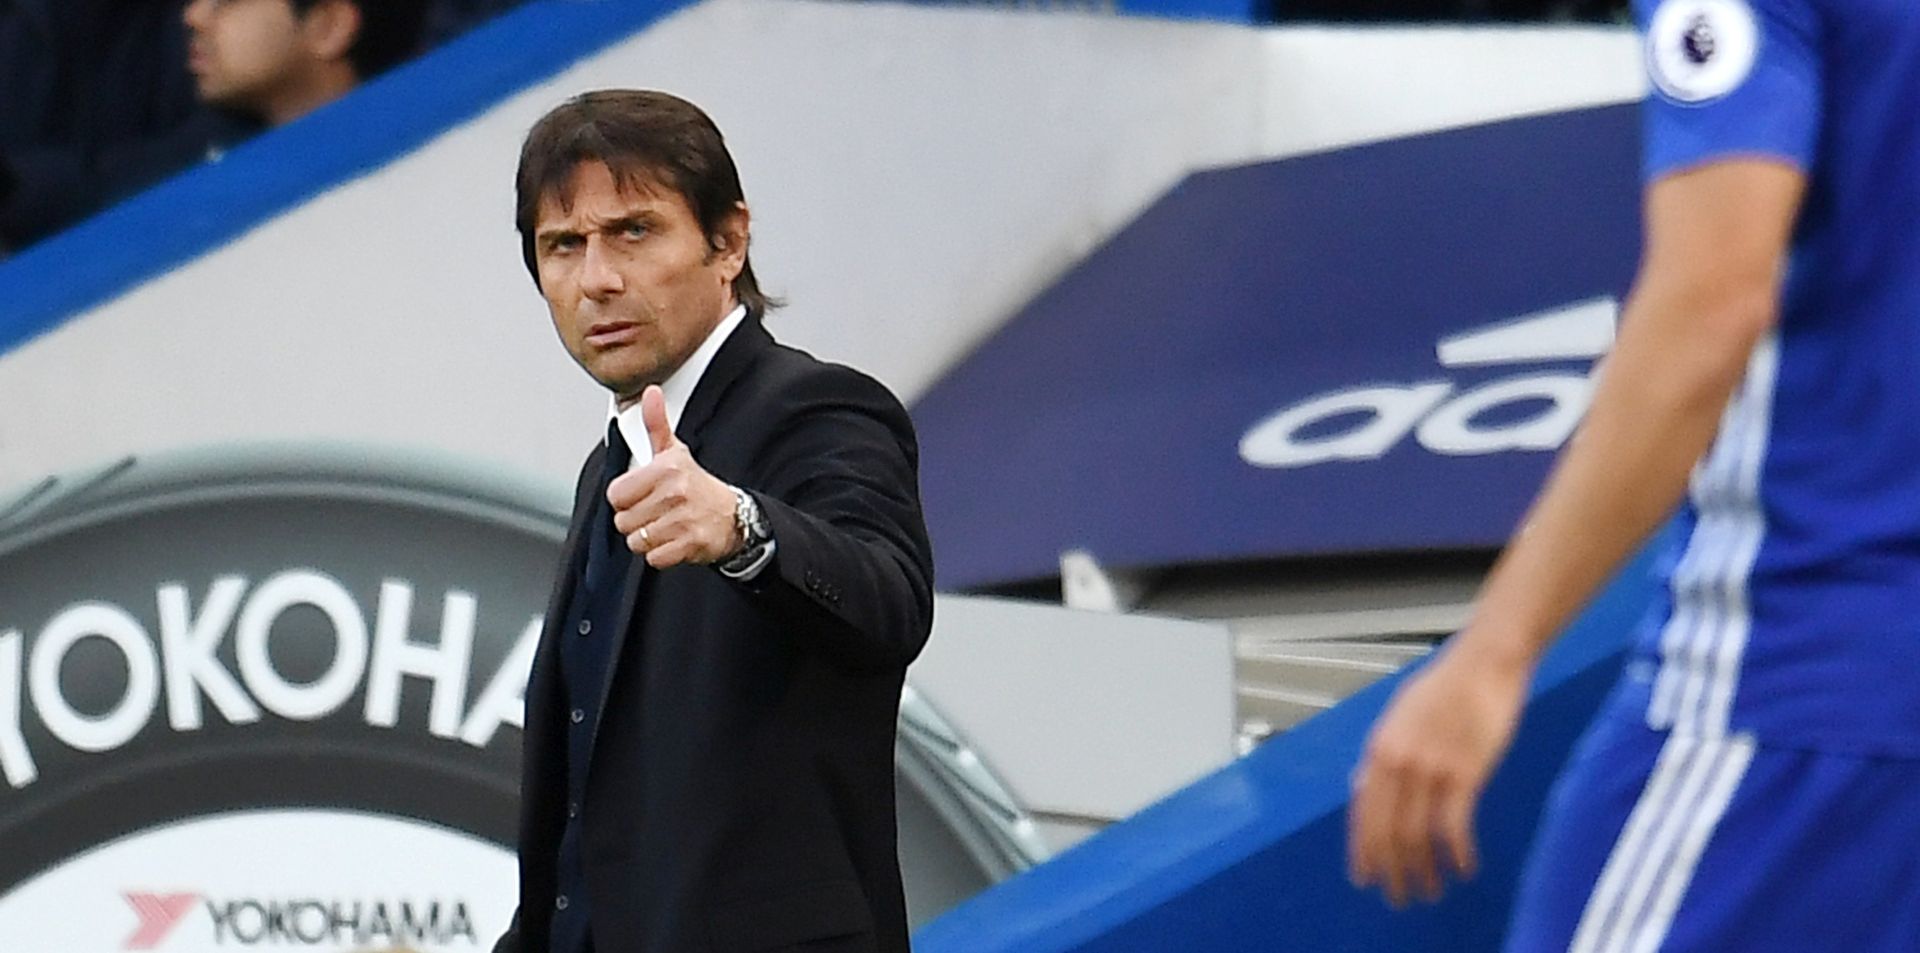 epa05951445 Chelsea manager Antonio Conte (L) gives the thumbs up to his player Diego Costa (R)  during the English Premier League soccer match between Chelsea FC and Middlesborough FC at Stamford Bridge in London, Britain, 08 May 2017.  EPA/ANDY RAIN EDITORIAL USE ONLY. No use with unauthorized audio, video, data, fixture lists, club/league logos or 'live' service. Online in-match use limited to 75 images, no video emulation. No use in betting, games or single club/league/player publications.